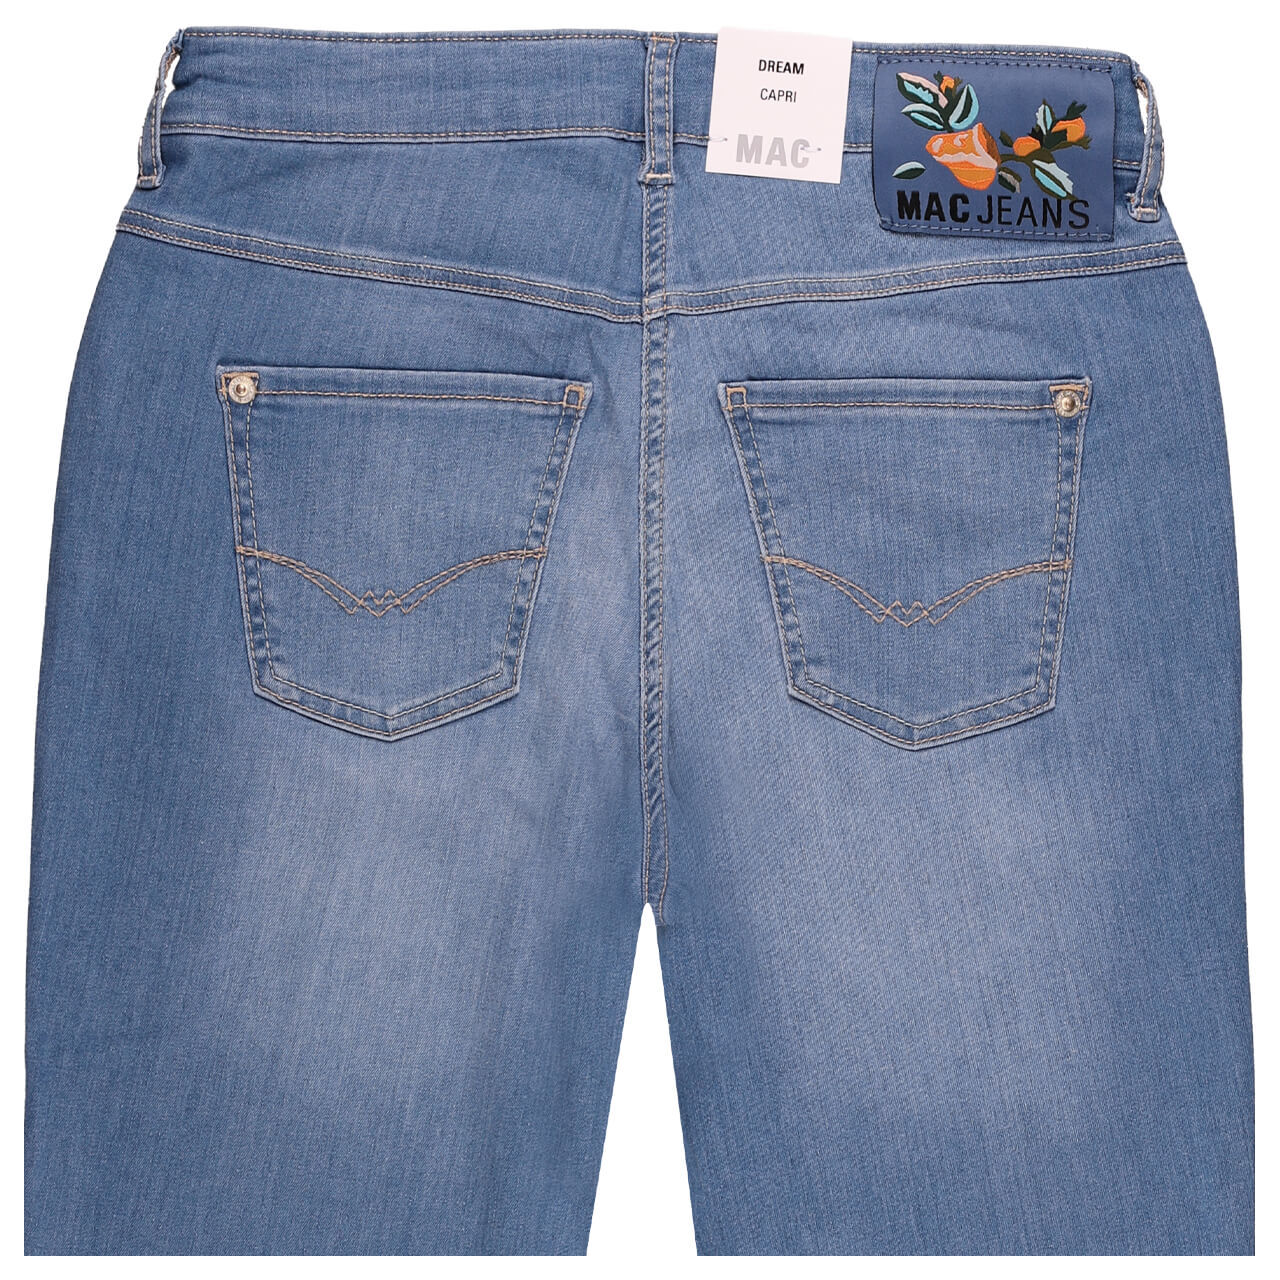 MAC Dream Sun 3/4 Jeans simple blue washed